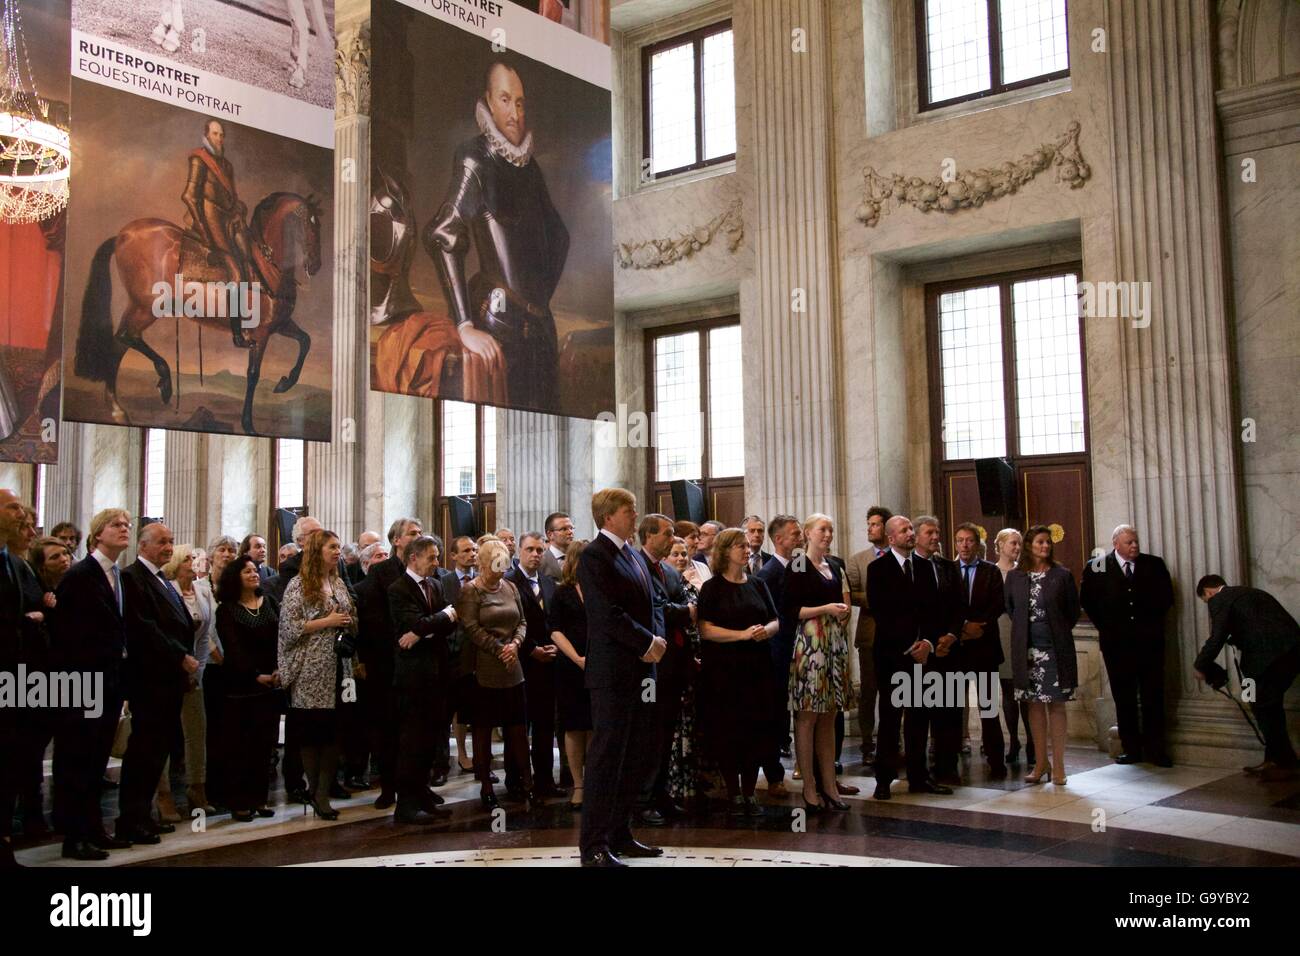 Amsterdam. 1st July, 2016. Dutch King Willem-Alexander(C) attends the opening ceremony of an exhibition on royal portraits at the National hall of the Royal Palace in Amsterdam, the Netherlands on July 1, 2016. The Dutch King Willem-Alexander opened the exhibition 'Dynasty, portraits of Oranje Nassau' here on Friday. © Sylvia Lederer/Xinhua/Alamy Live News Stock Photo